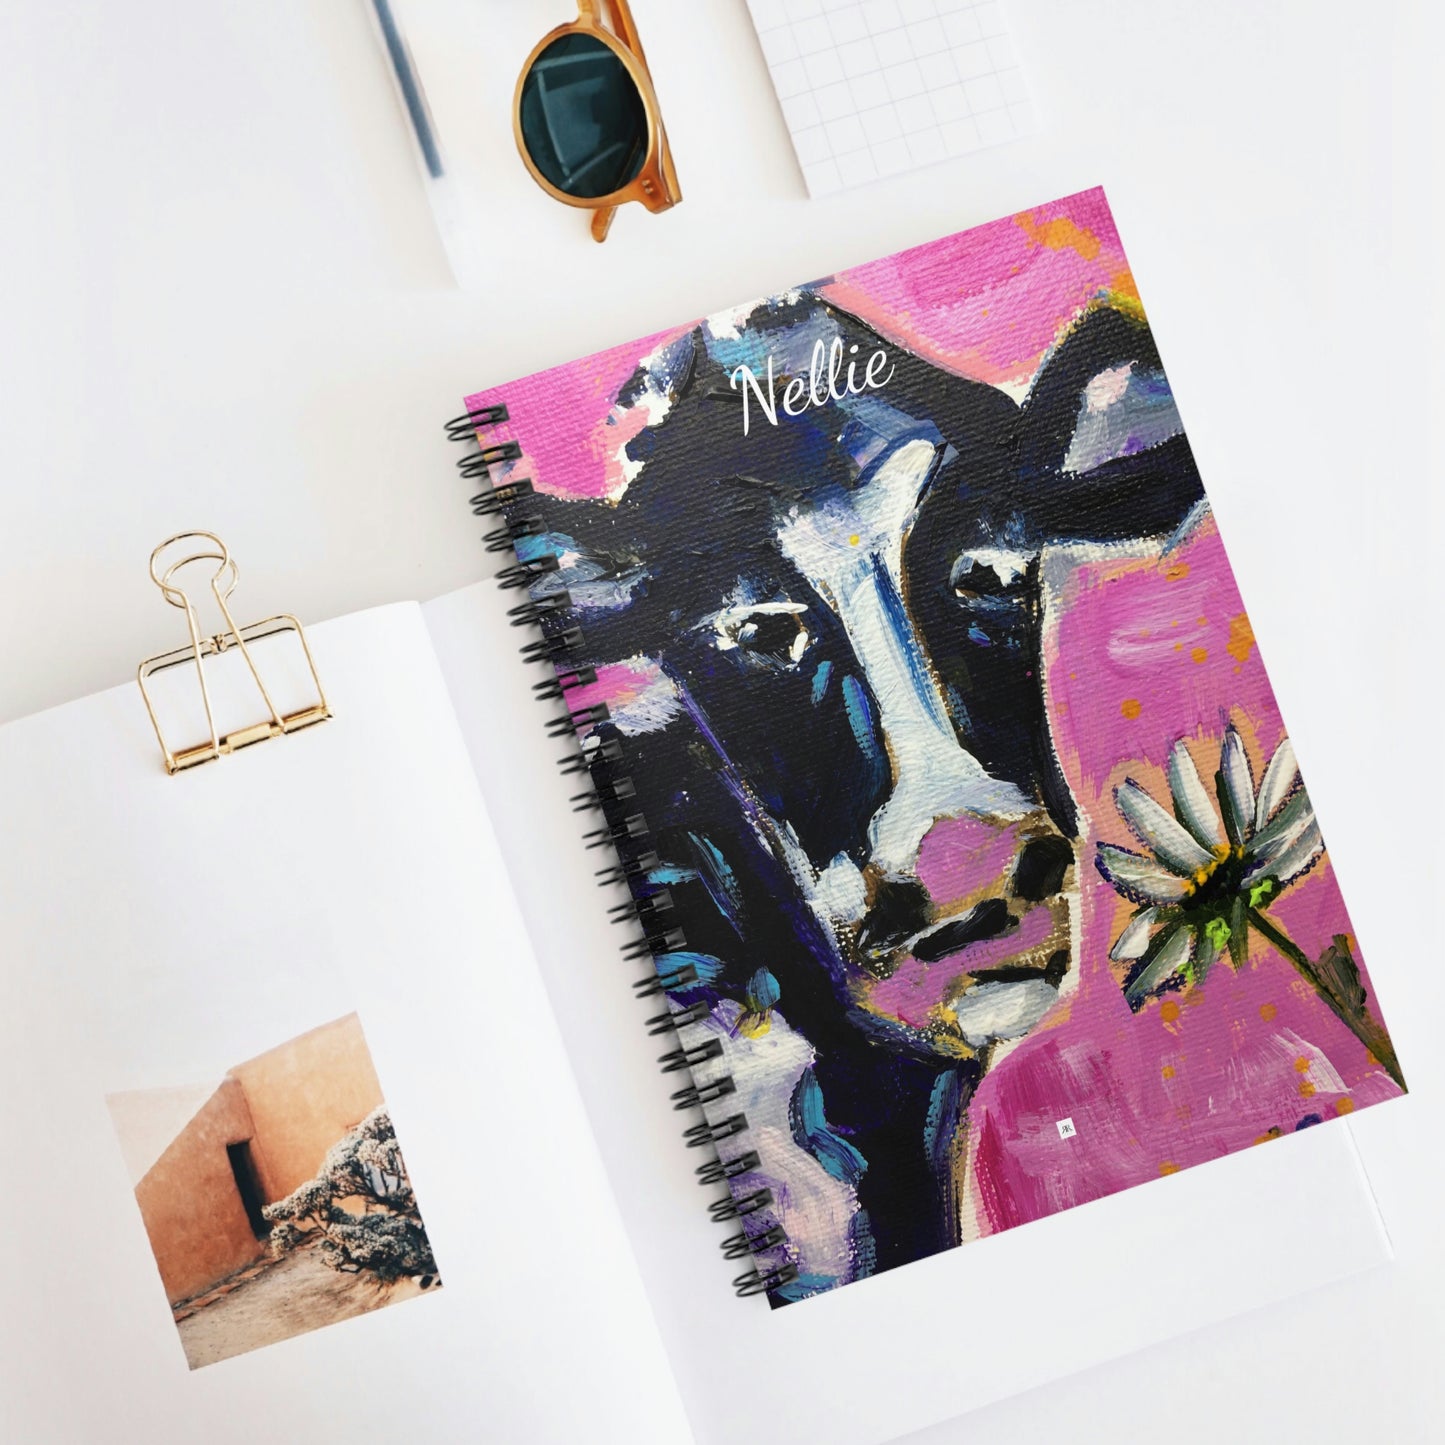 Nellie Cow - Whimsical Cow Painting Spiral Notebook